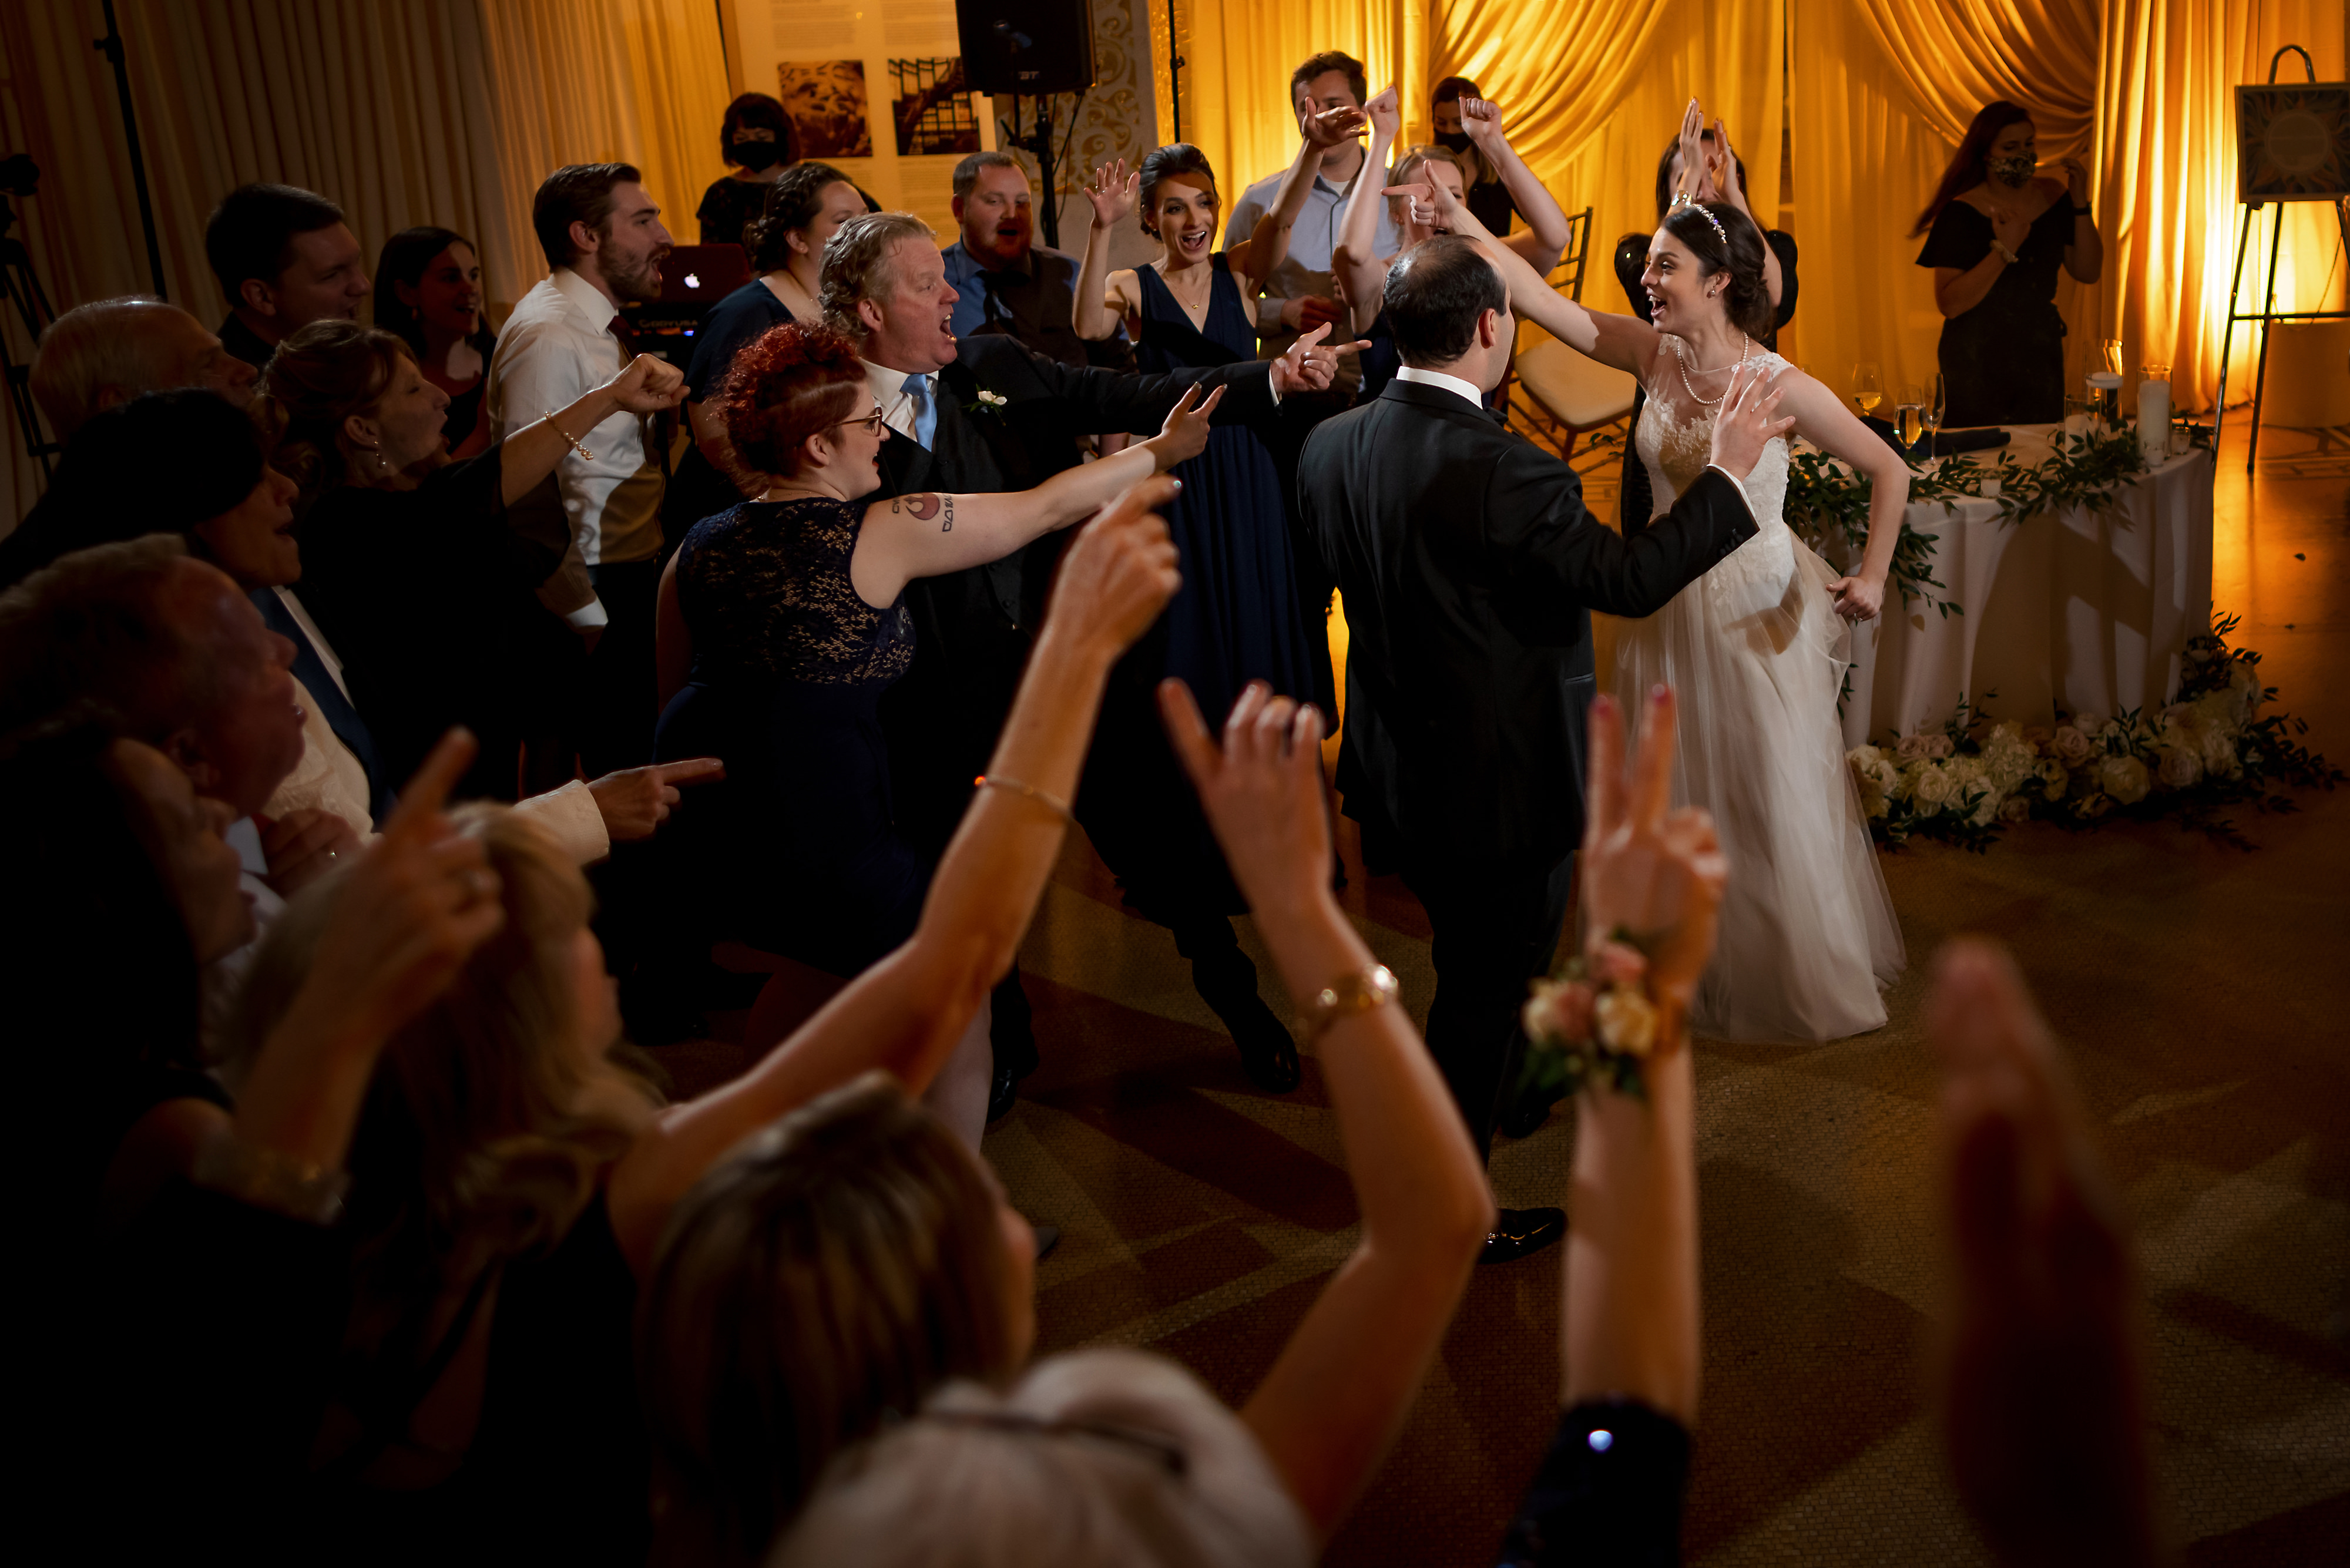 Wedding guests dance with couple during wedding reception at the Rookery Building in Chicago